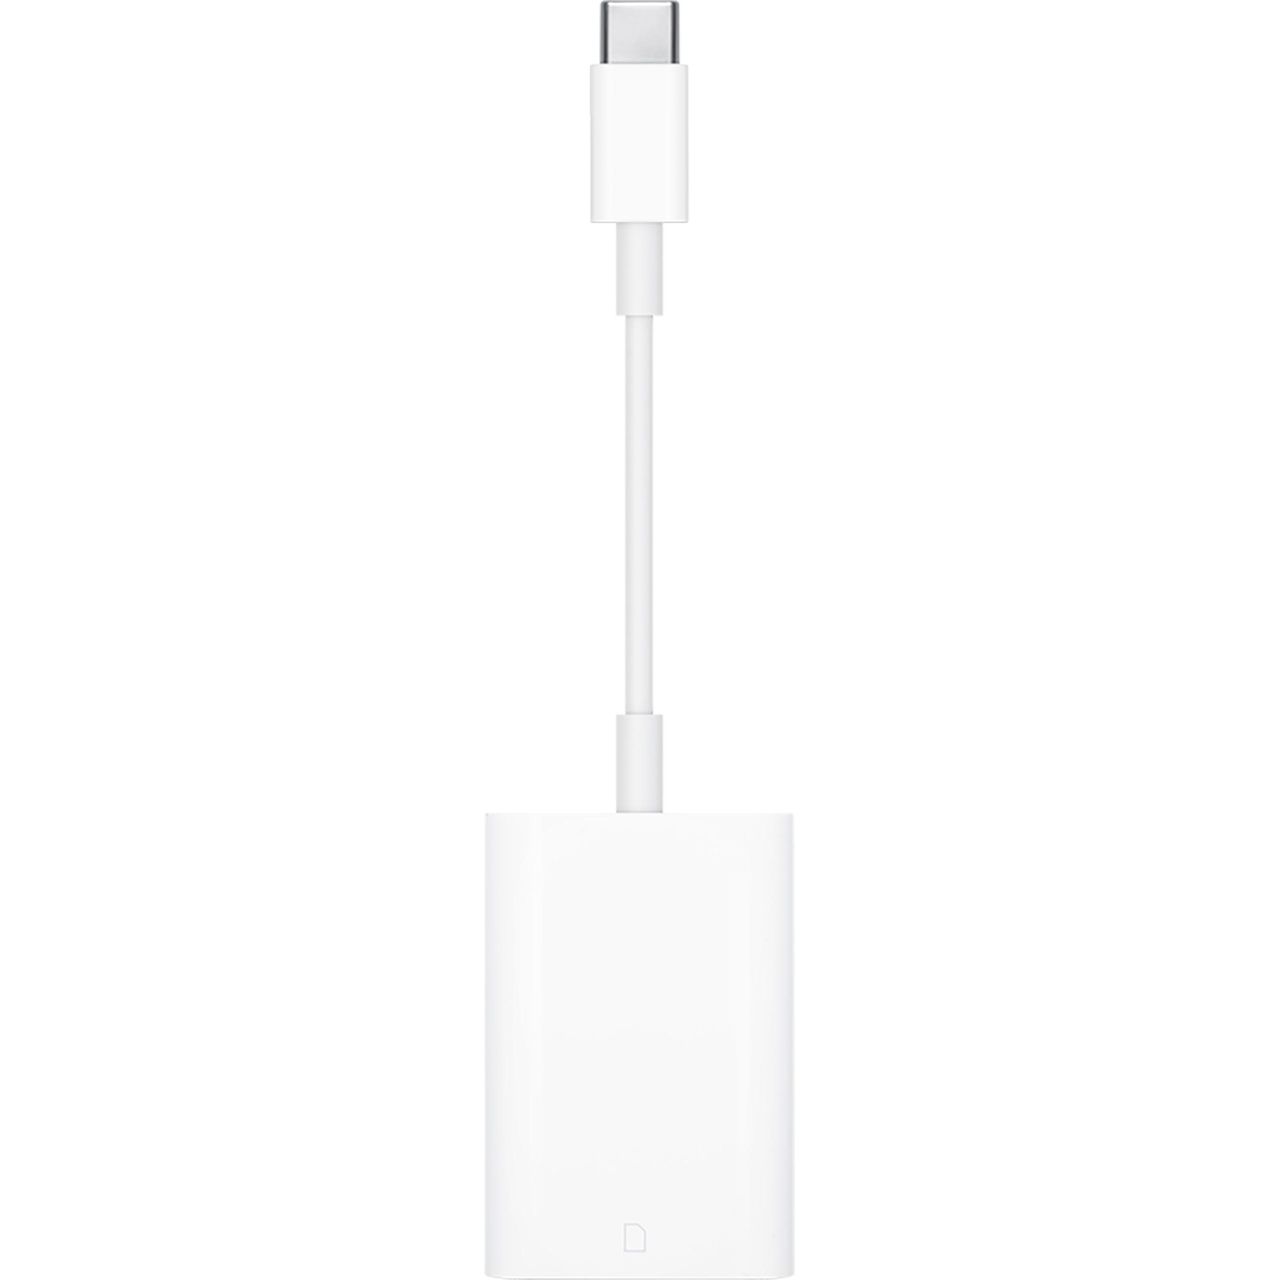 Apple USB-C To SD Card Reader (1 m) Review